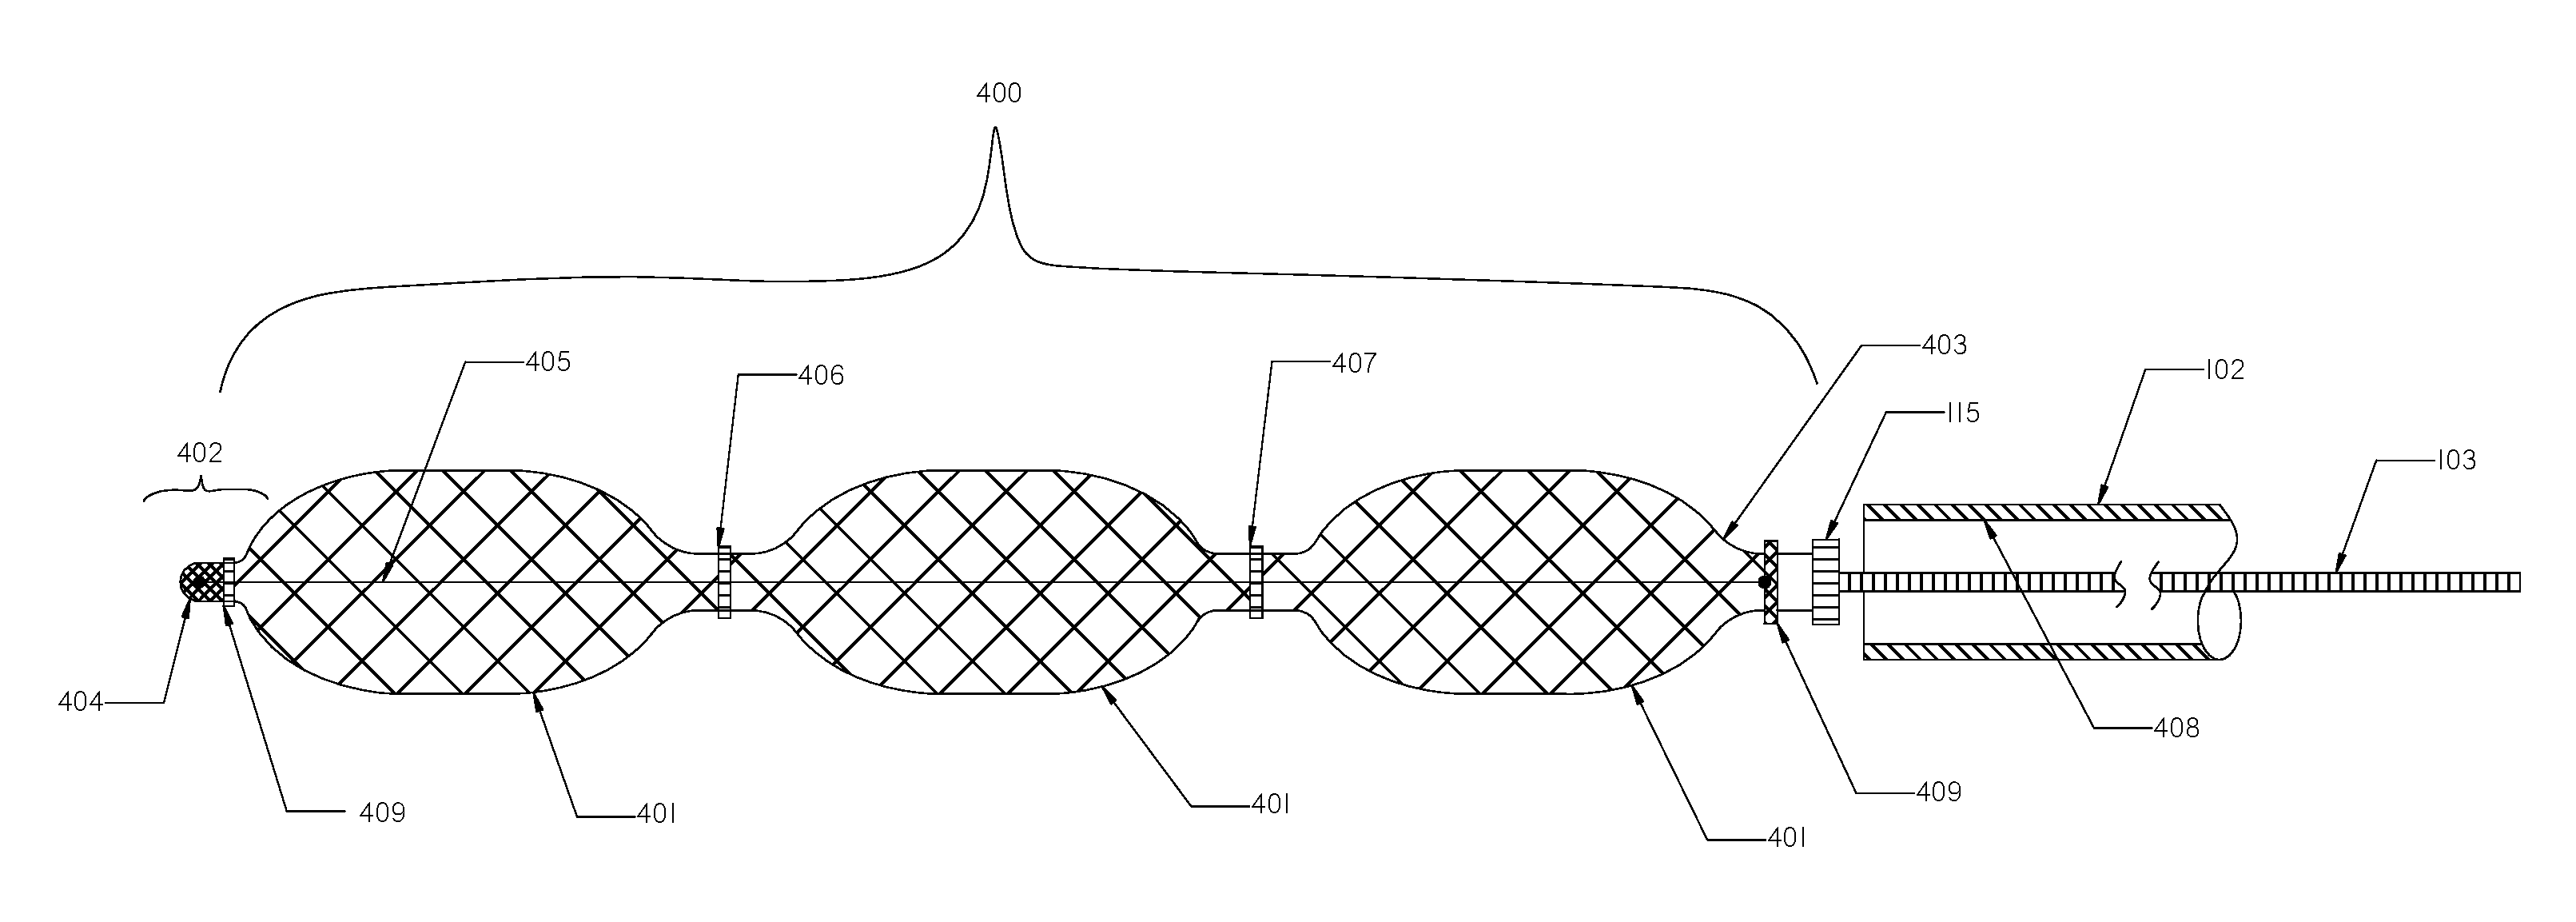 Devices and Methods for Treatment of Endovascular and Non-Endovascular Defects in Humans Using Occlusion Implants